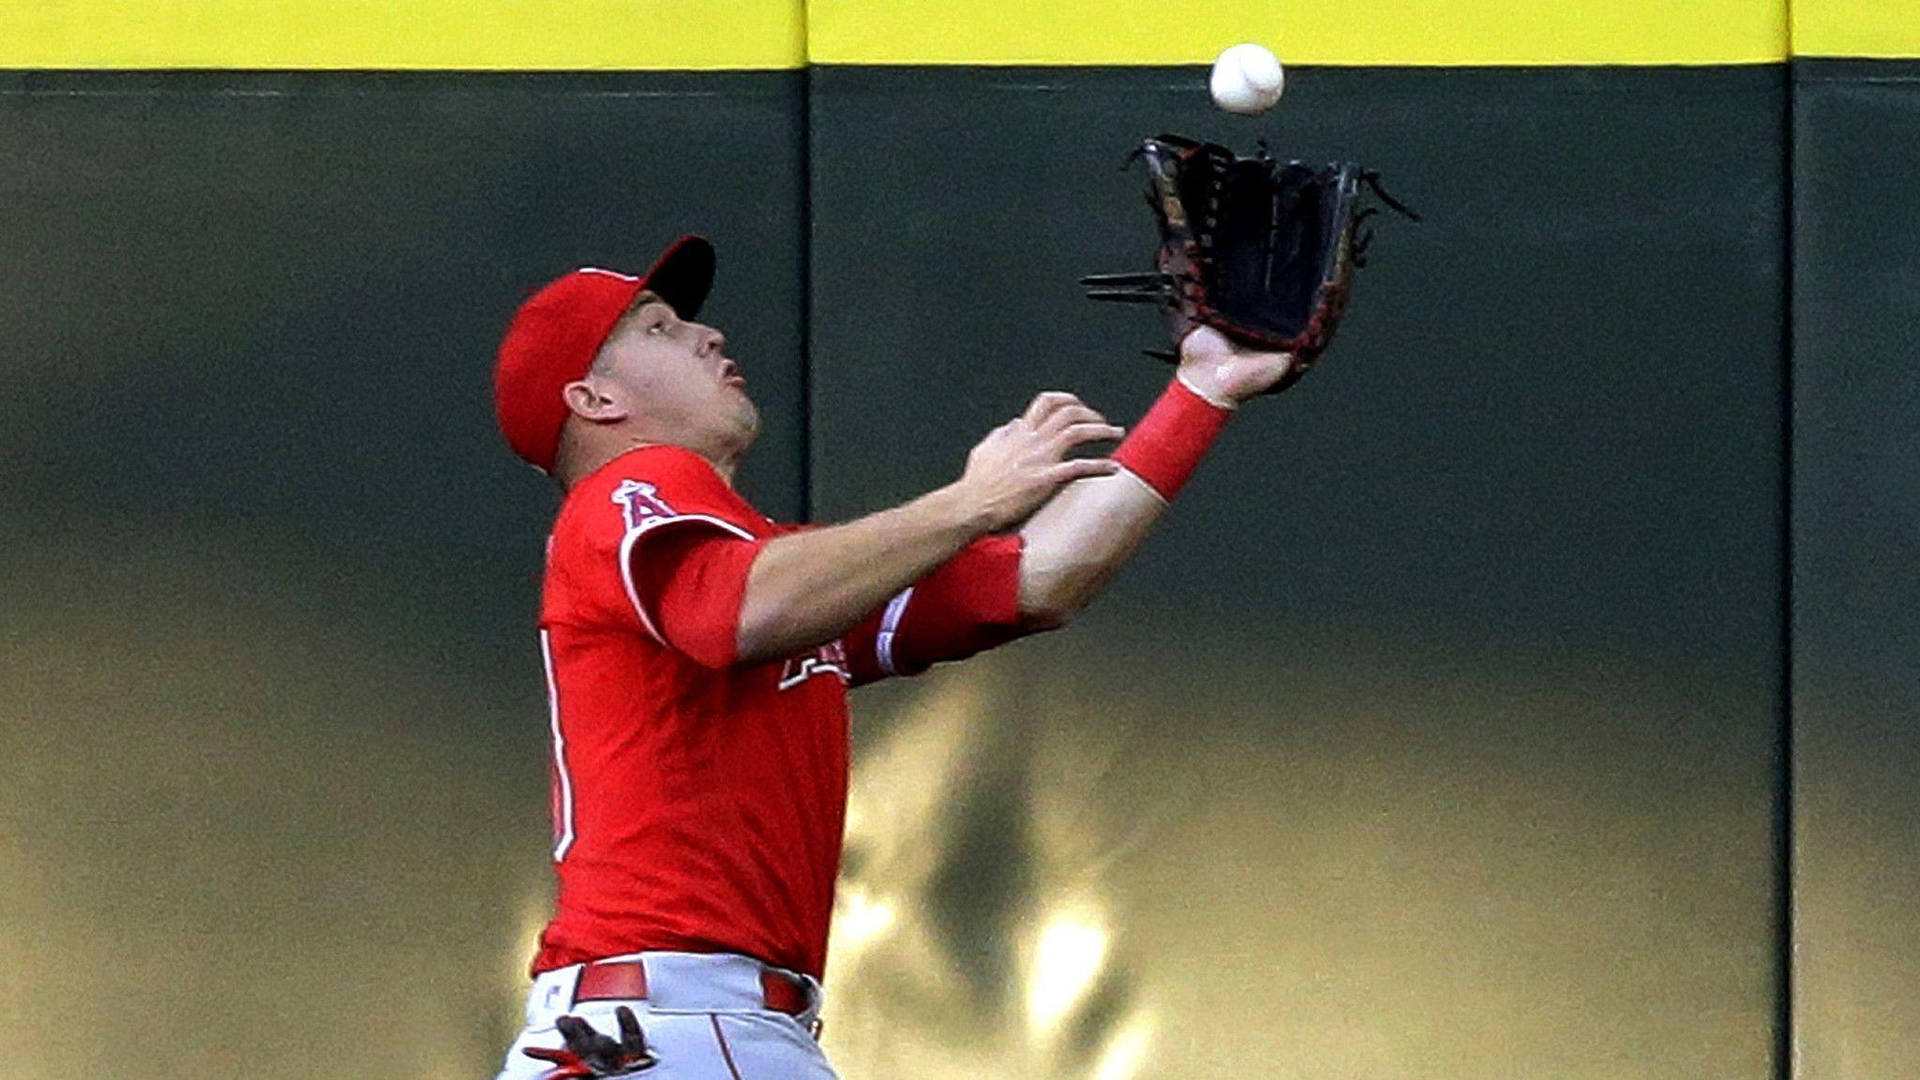 Mike Trout Catching The Ball Background